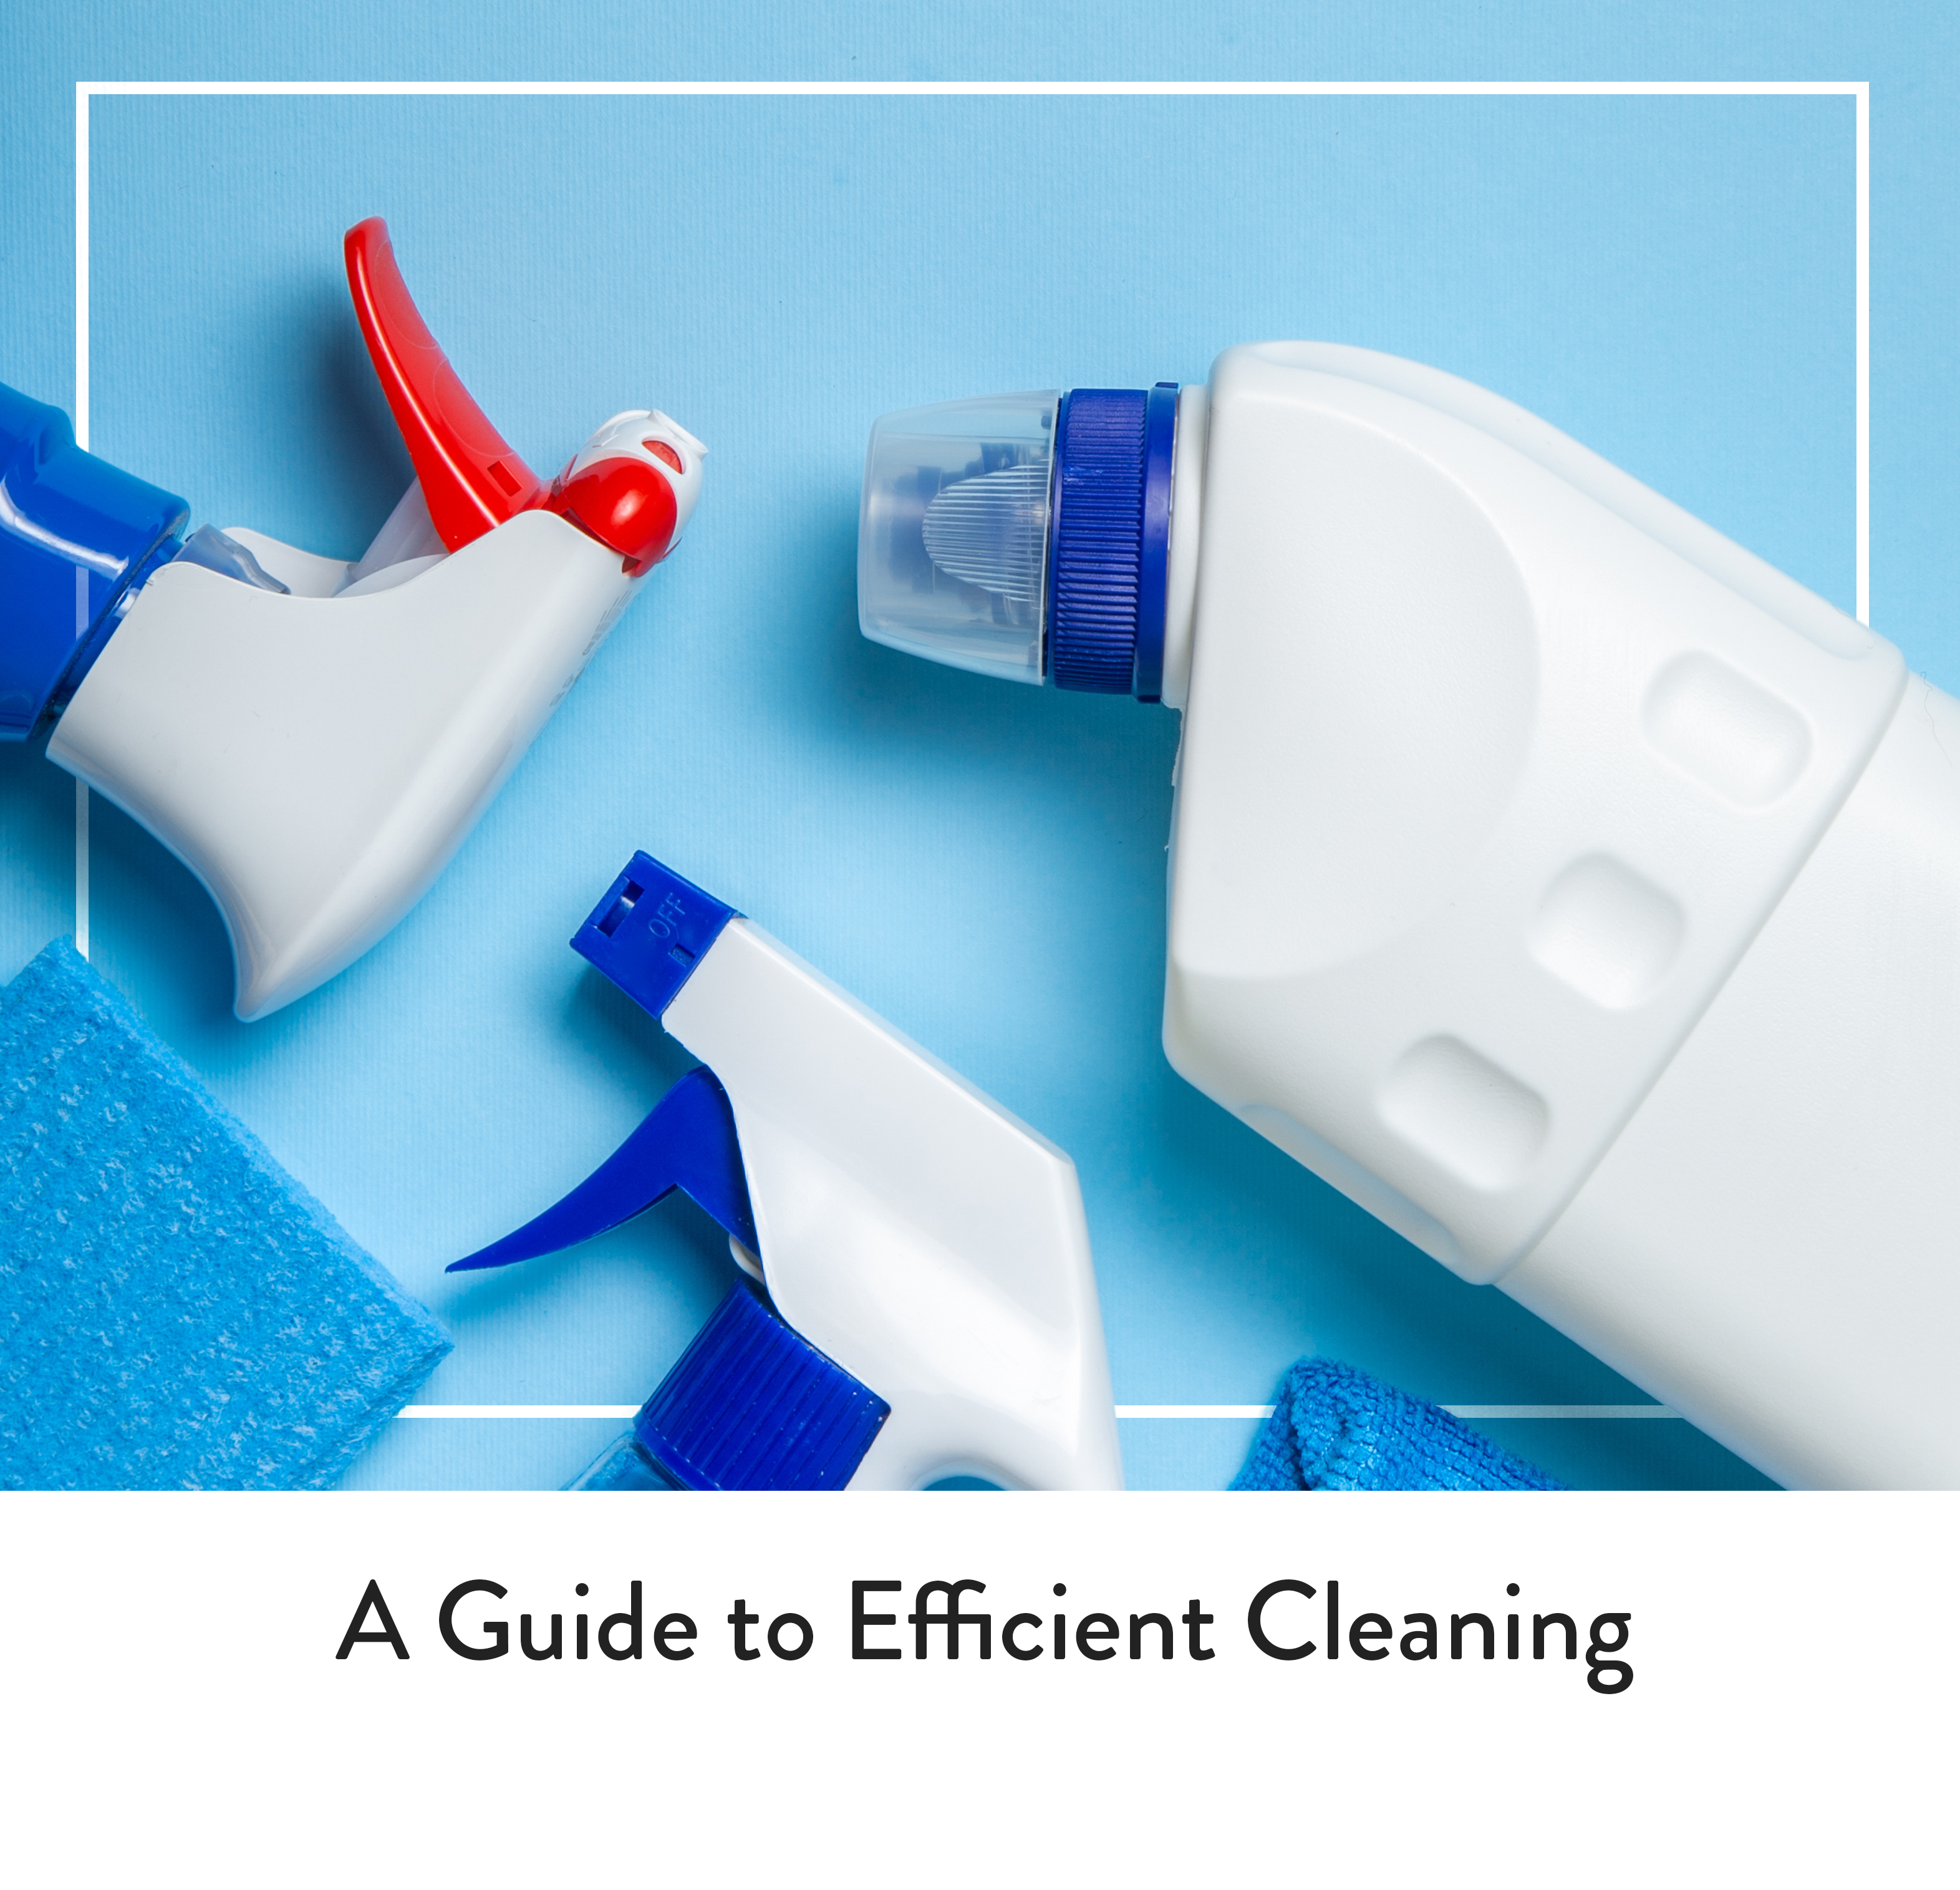 A Guide to Efficient Cleaning